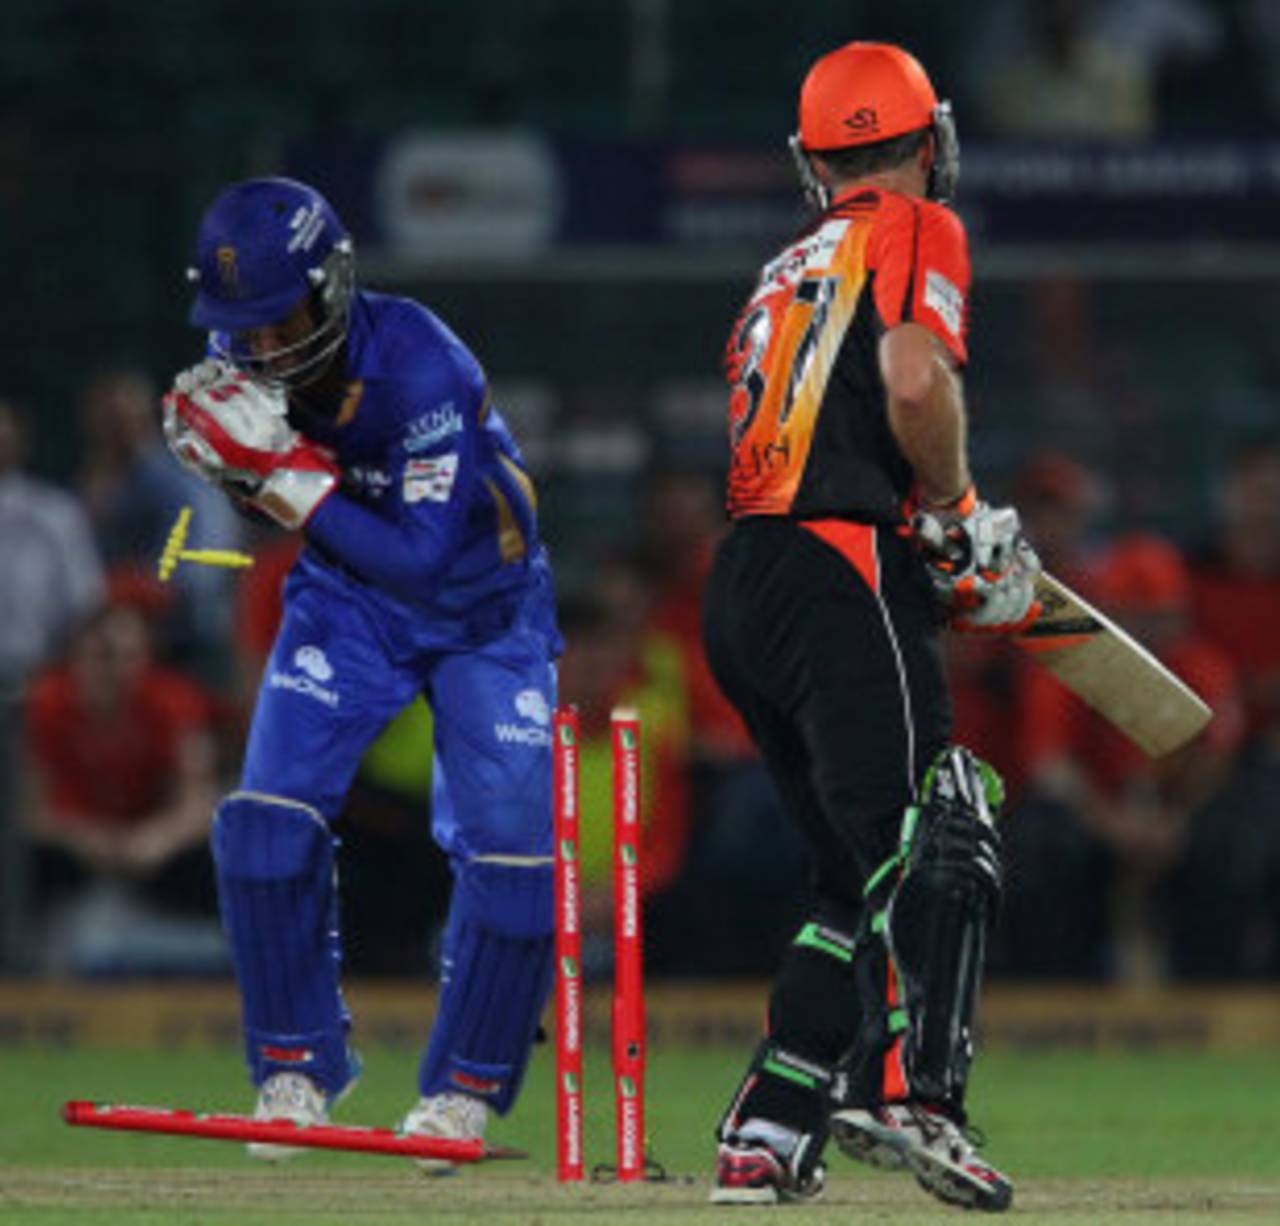 Sanju Samson whips the bails as Simon Katich looks on, Perth Scorchers v Rajasthan Royals, Group A, Champions League 2013, Jaipur, September 29, 2013